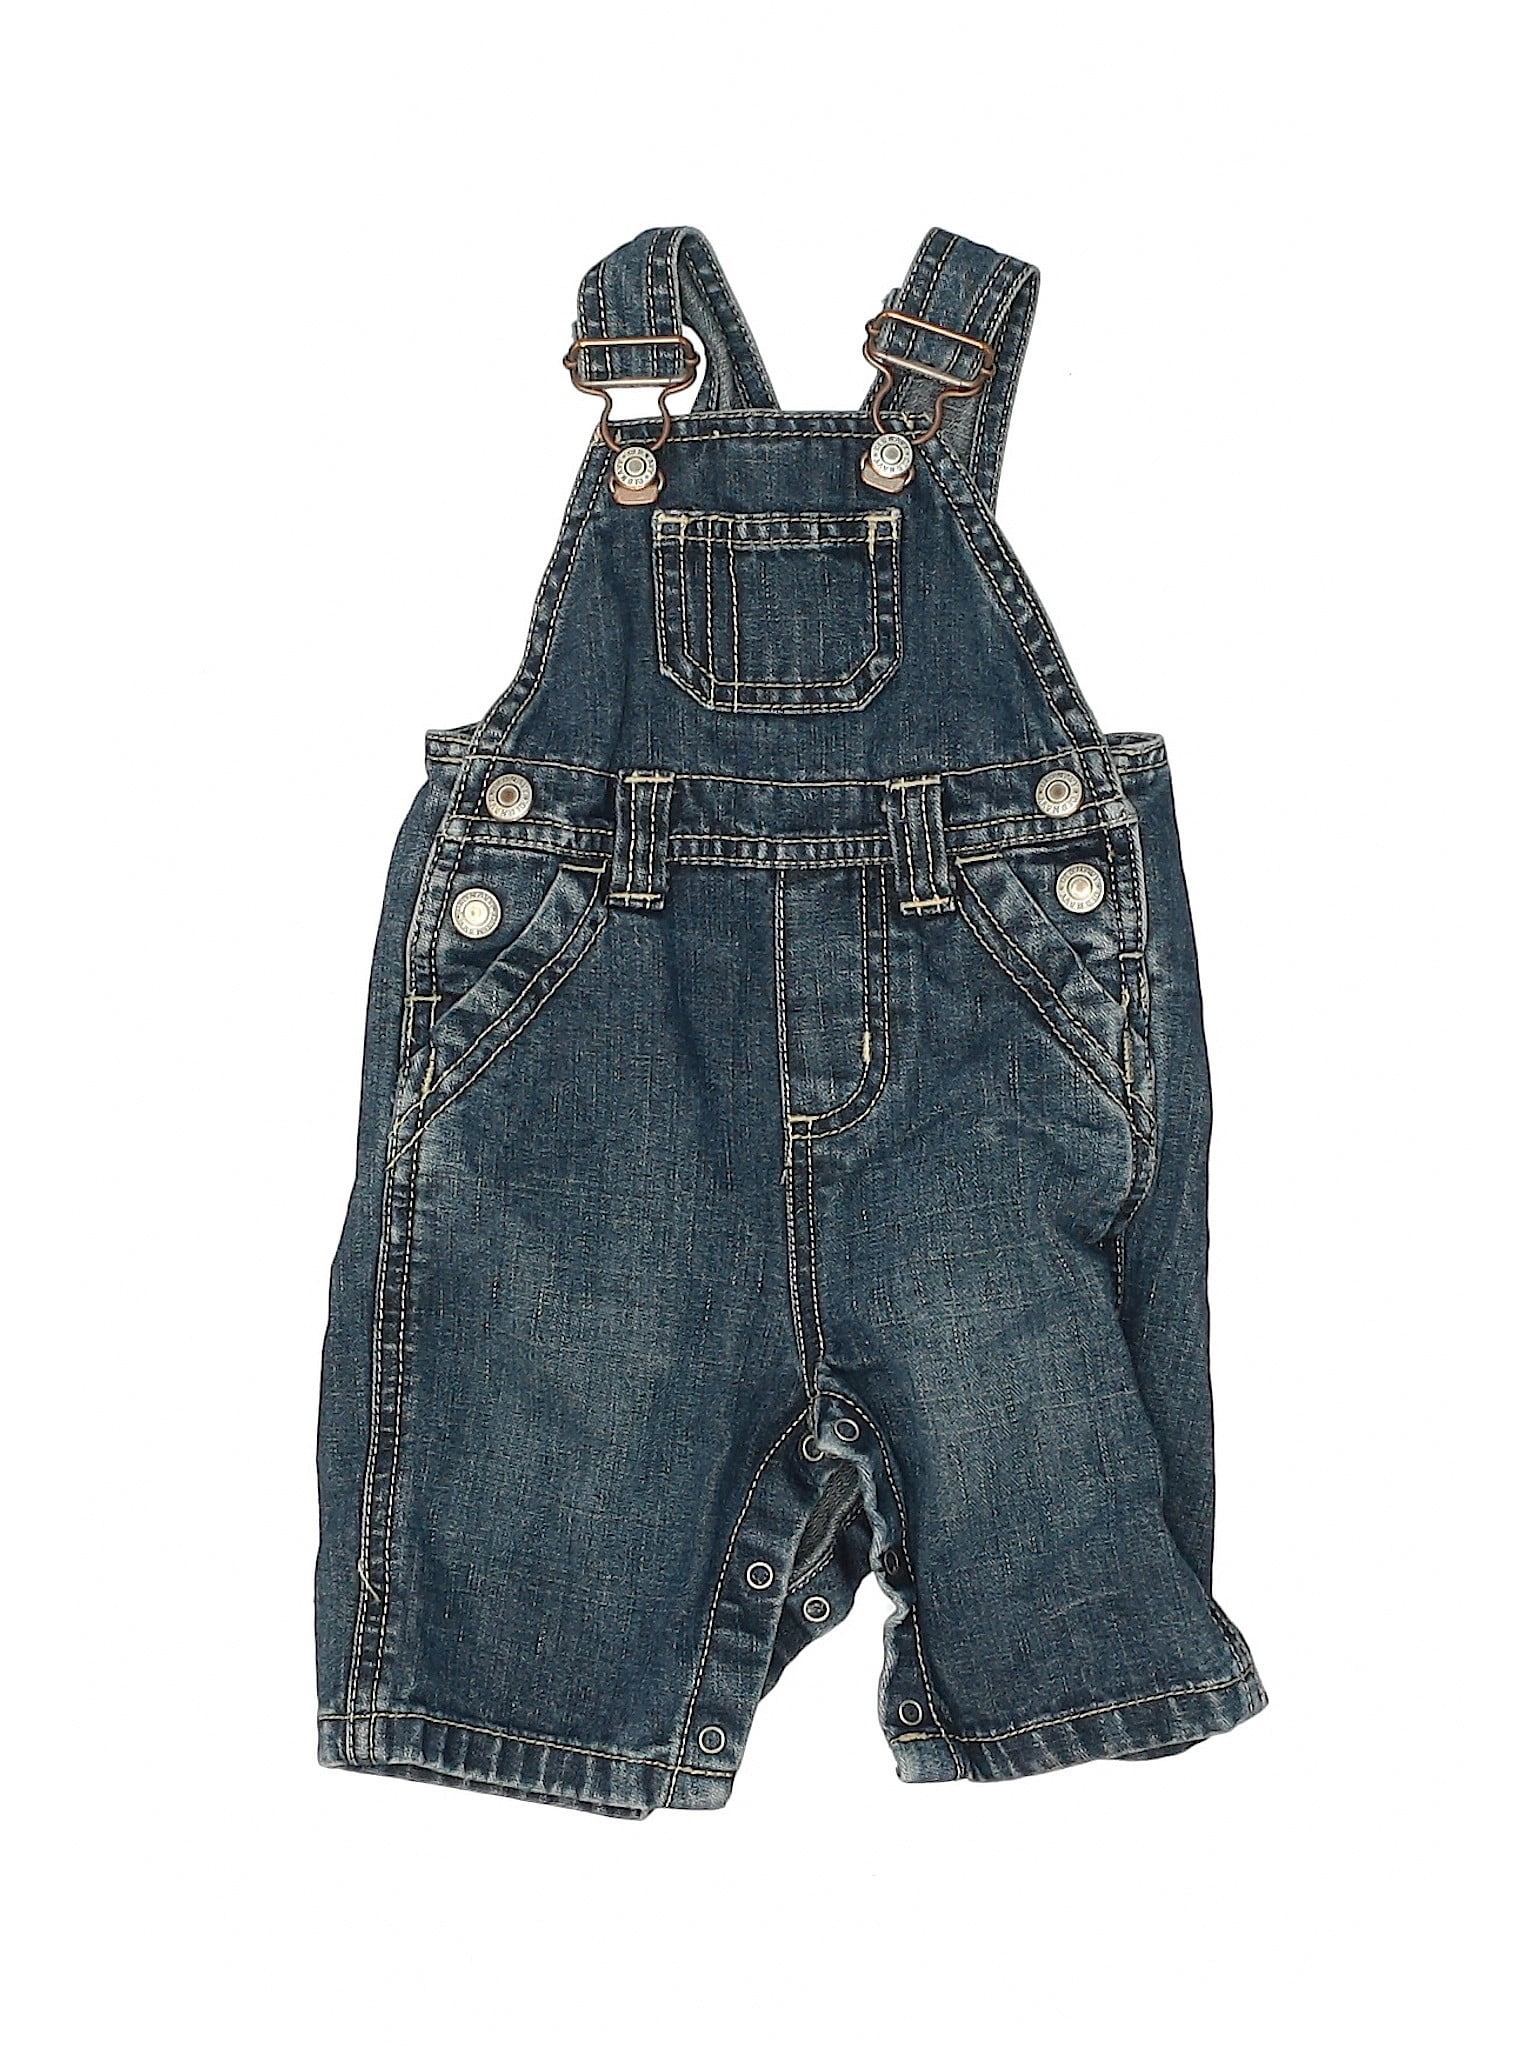 Pre-Owned Old Navy Girl's Size 0-3 Mo Overall Shorts - Walmart.com ...